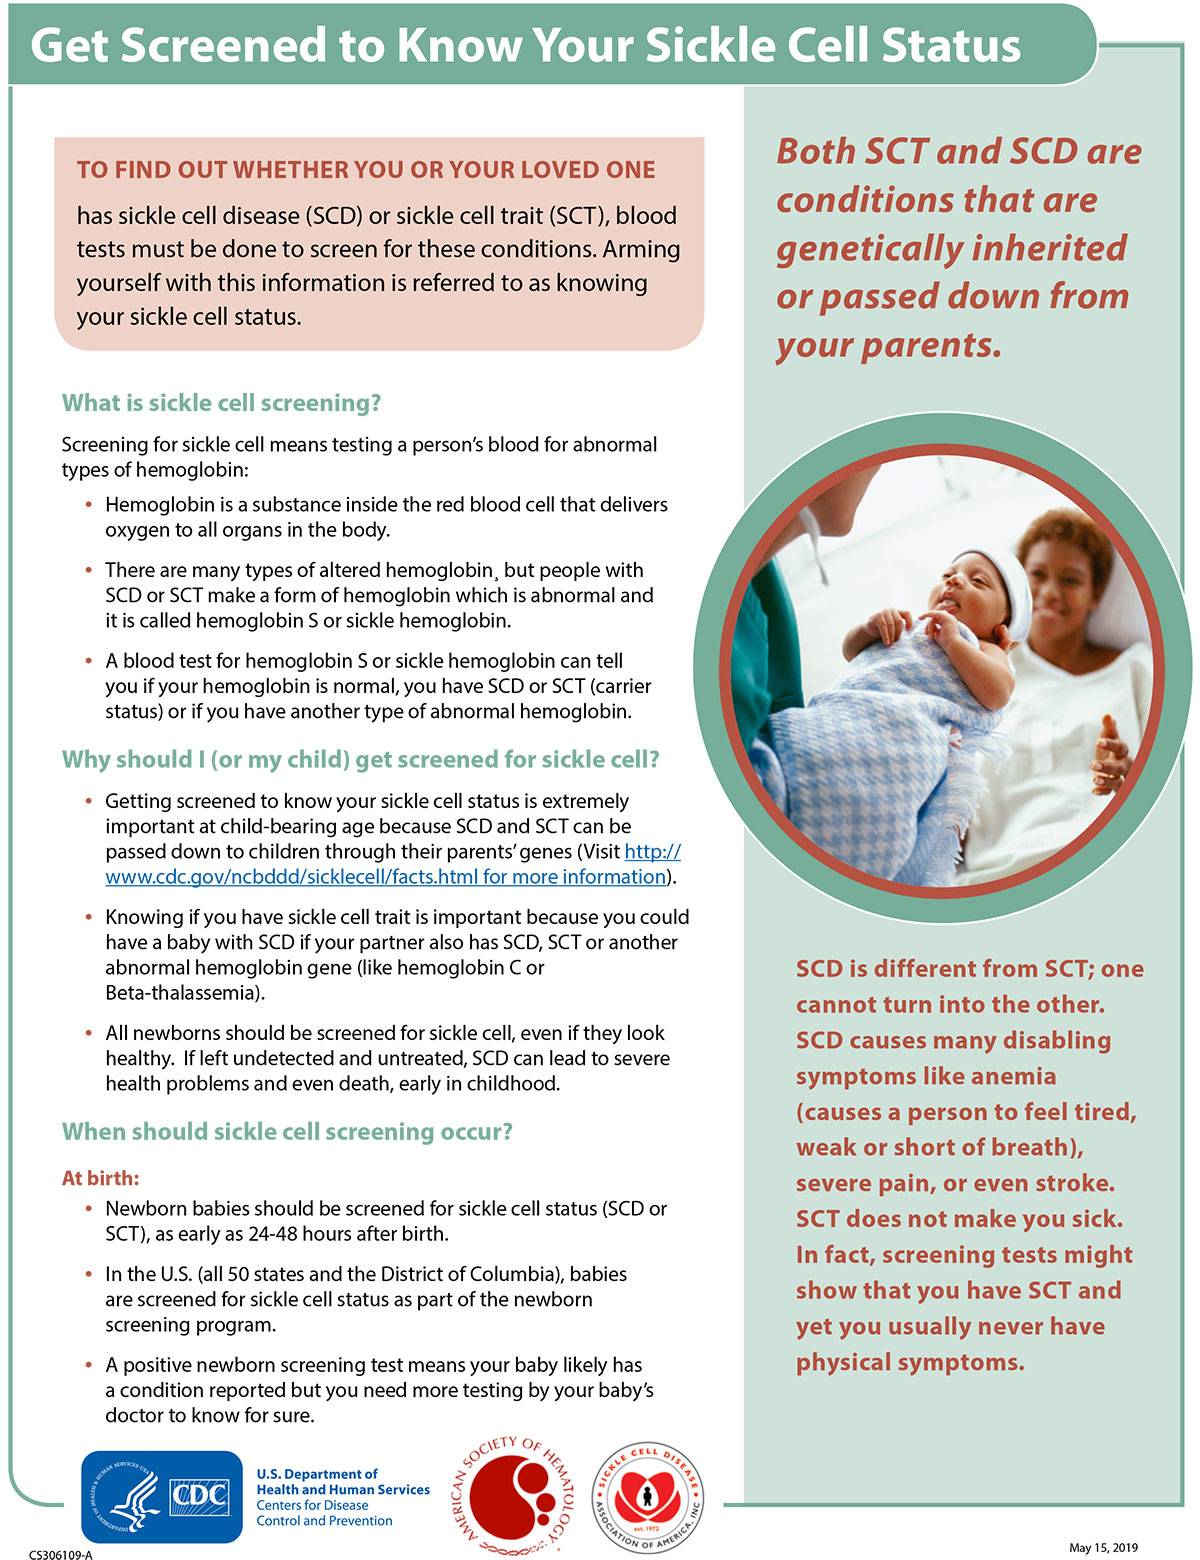 Get Screened to Know Your Sickle Cell Status factsheet thumbnail